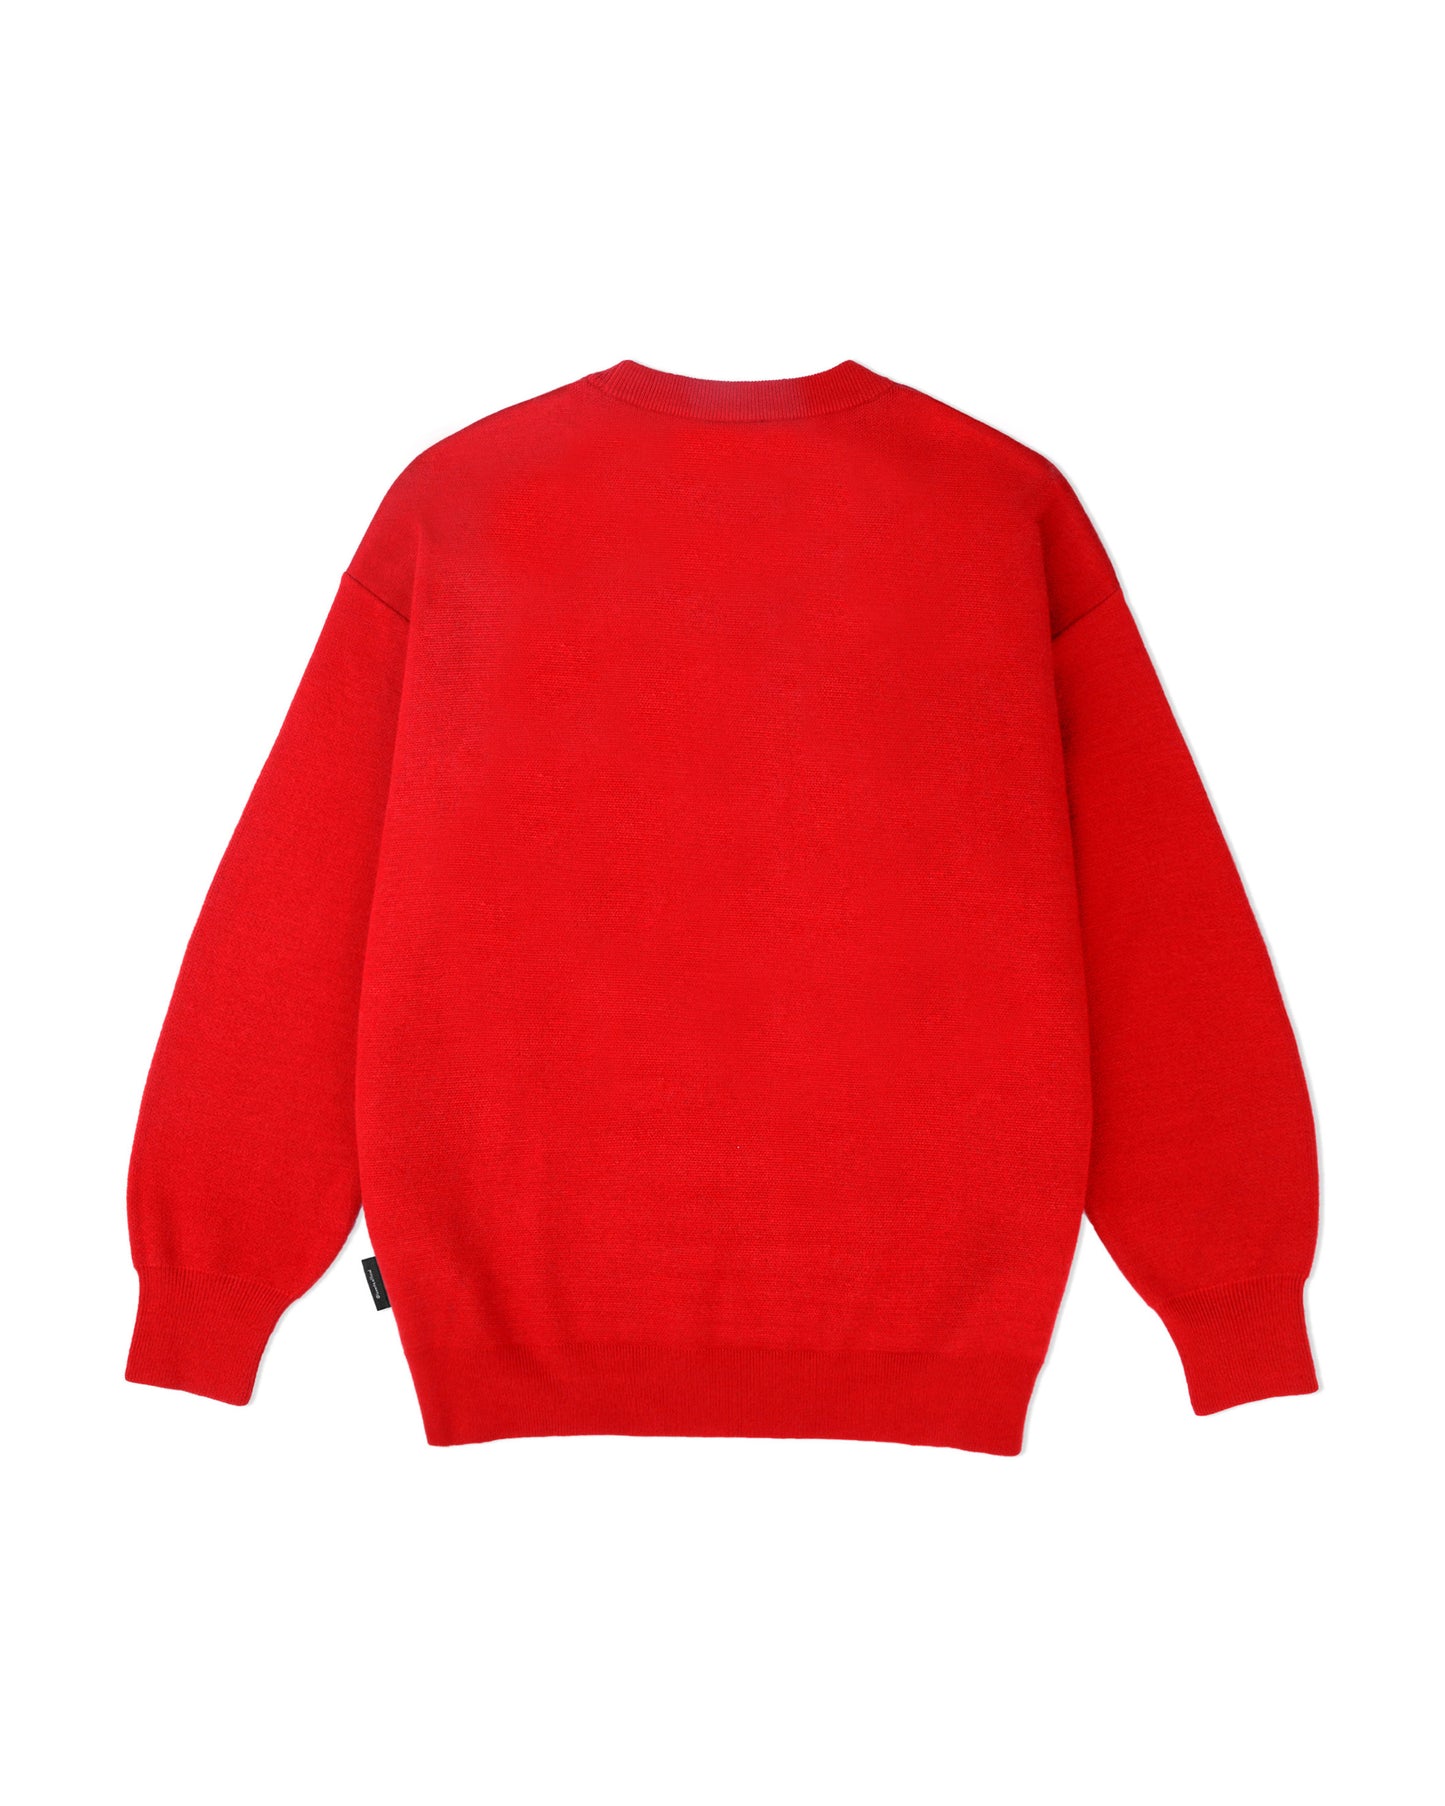 Levents® "My Animals" Series Panther Knit Sweater/ Red